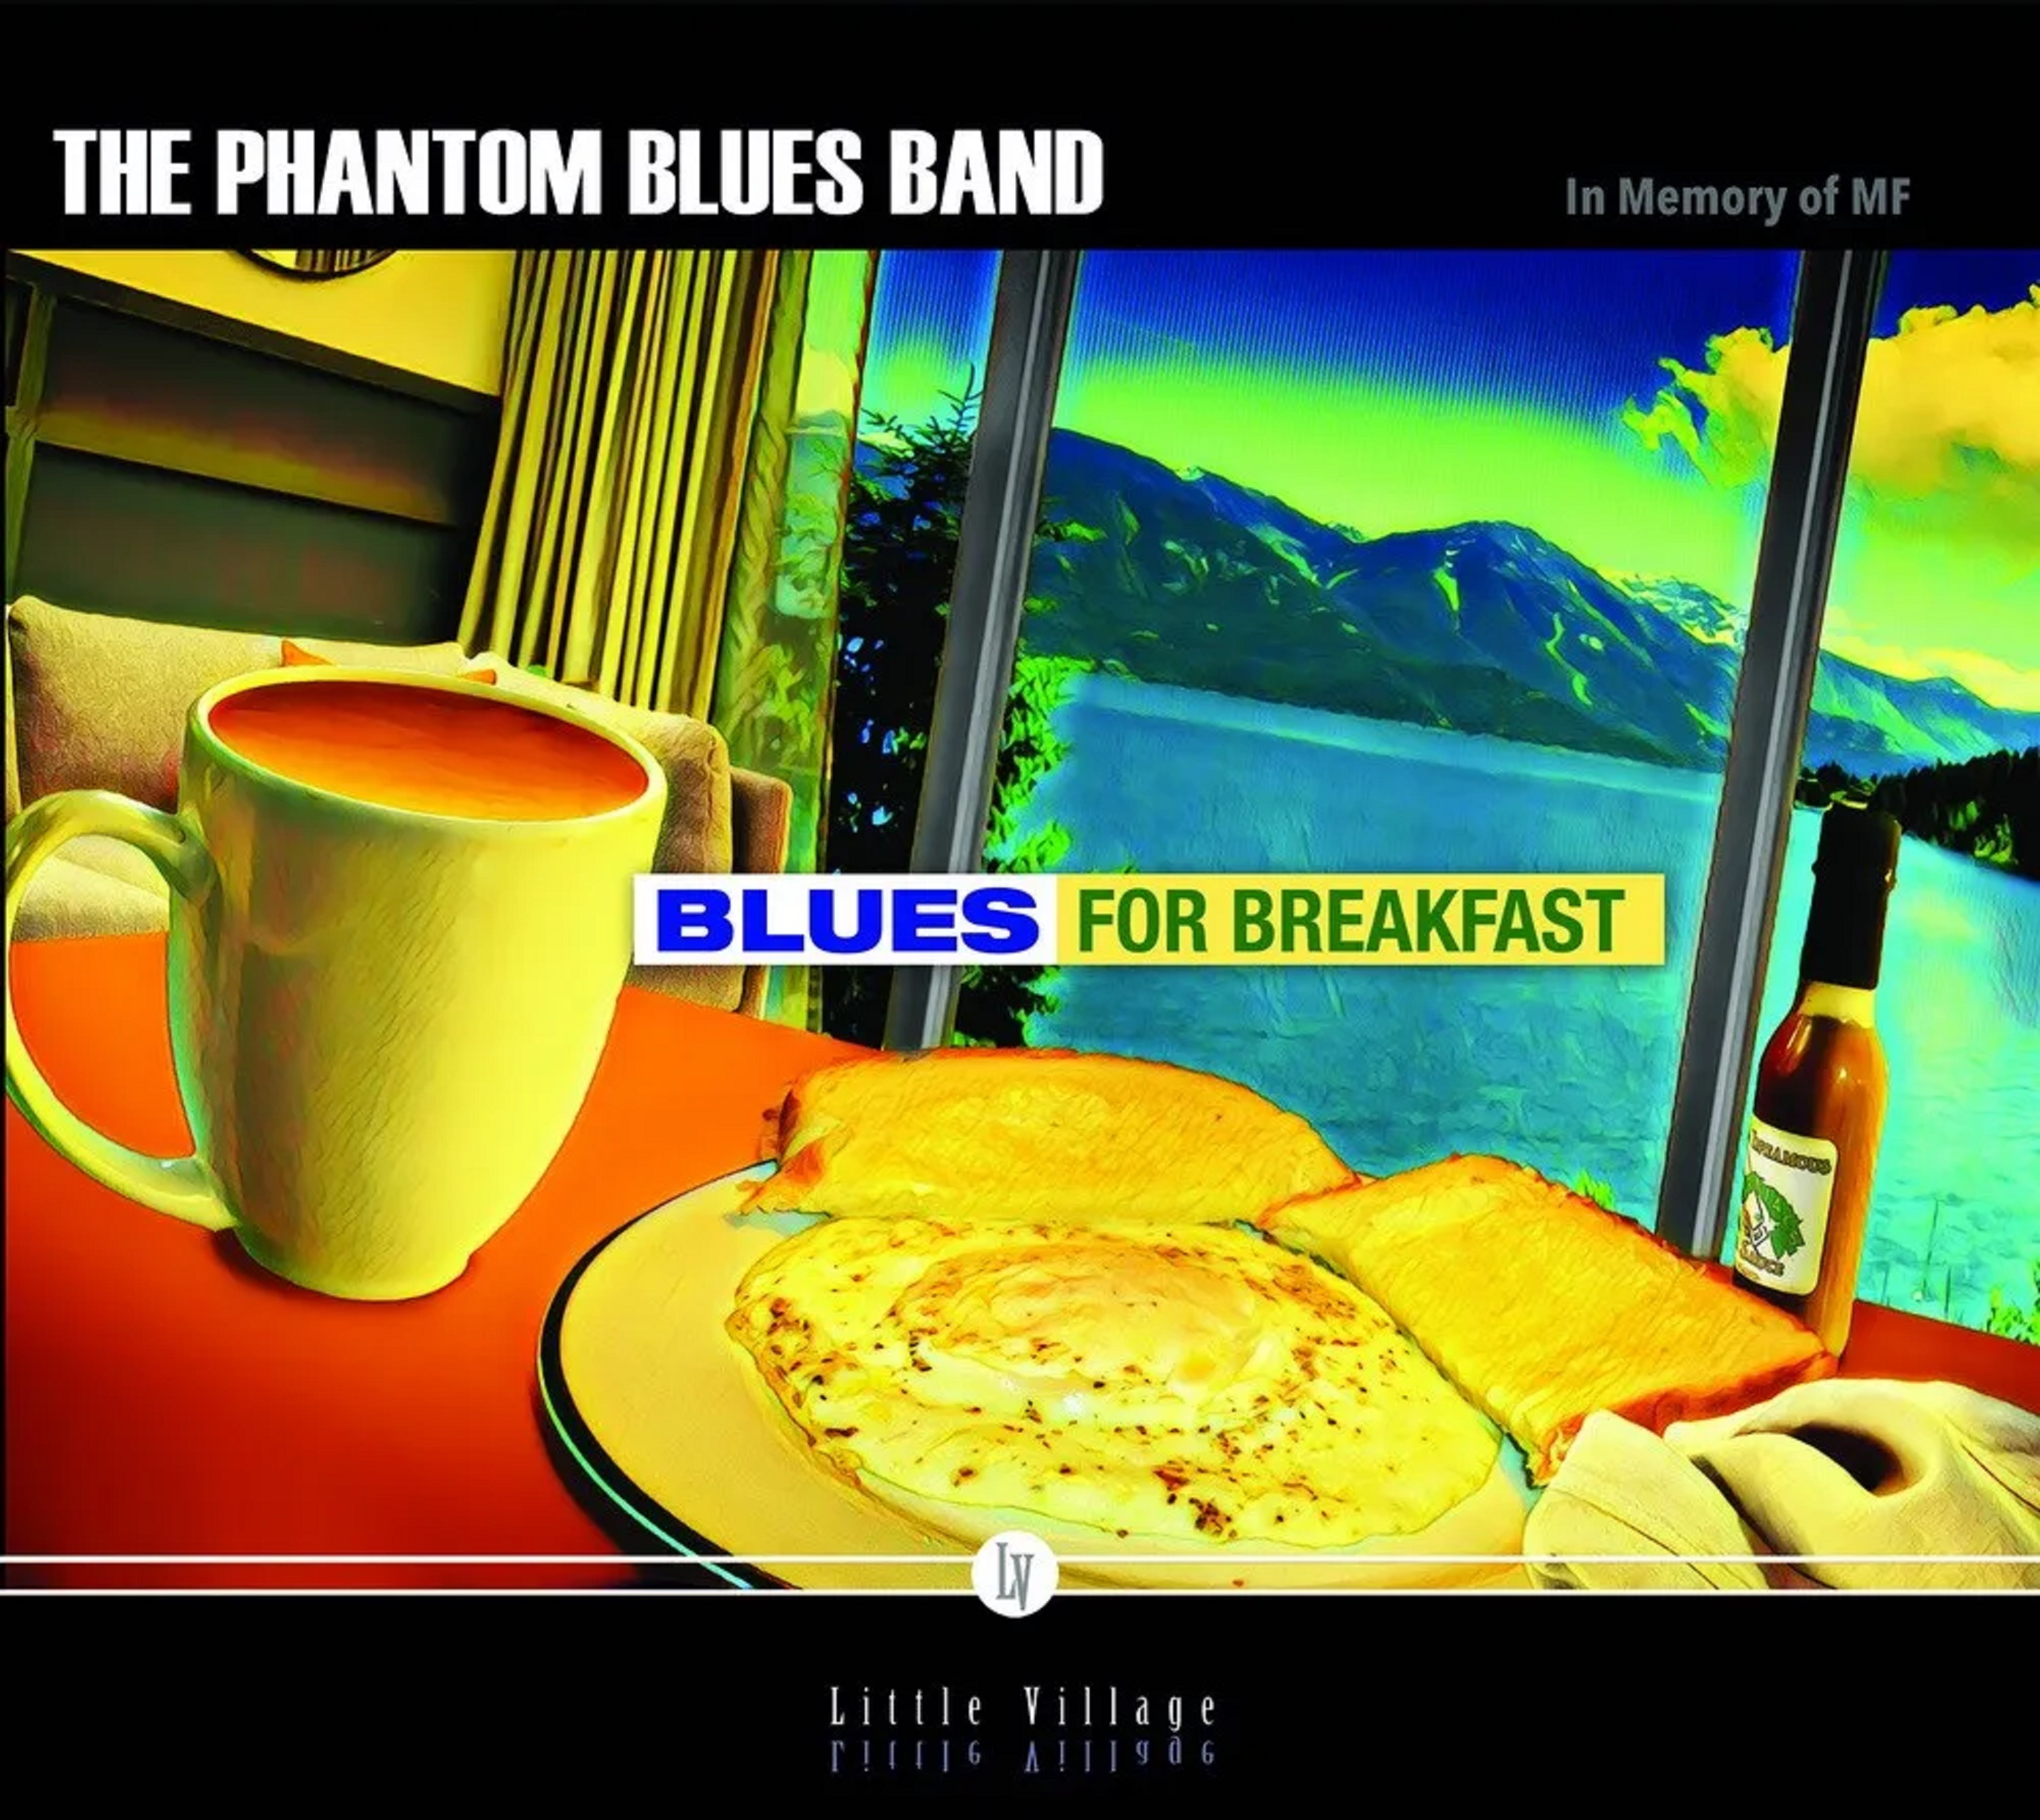 Phantom Blues Band's "Blues for Breakfast" Available July 4th, 2022